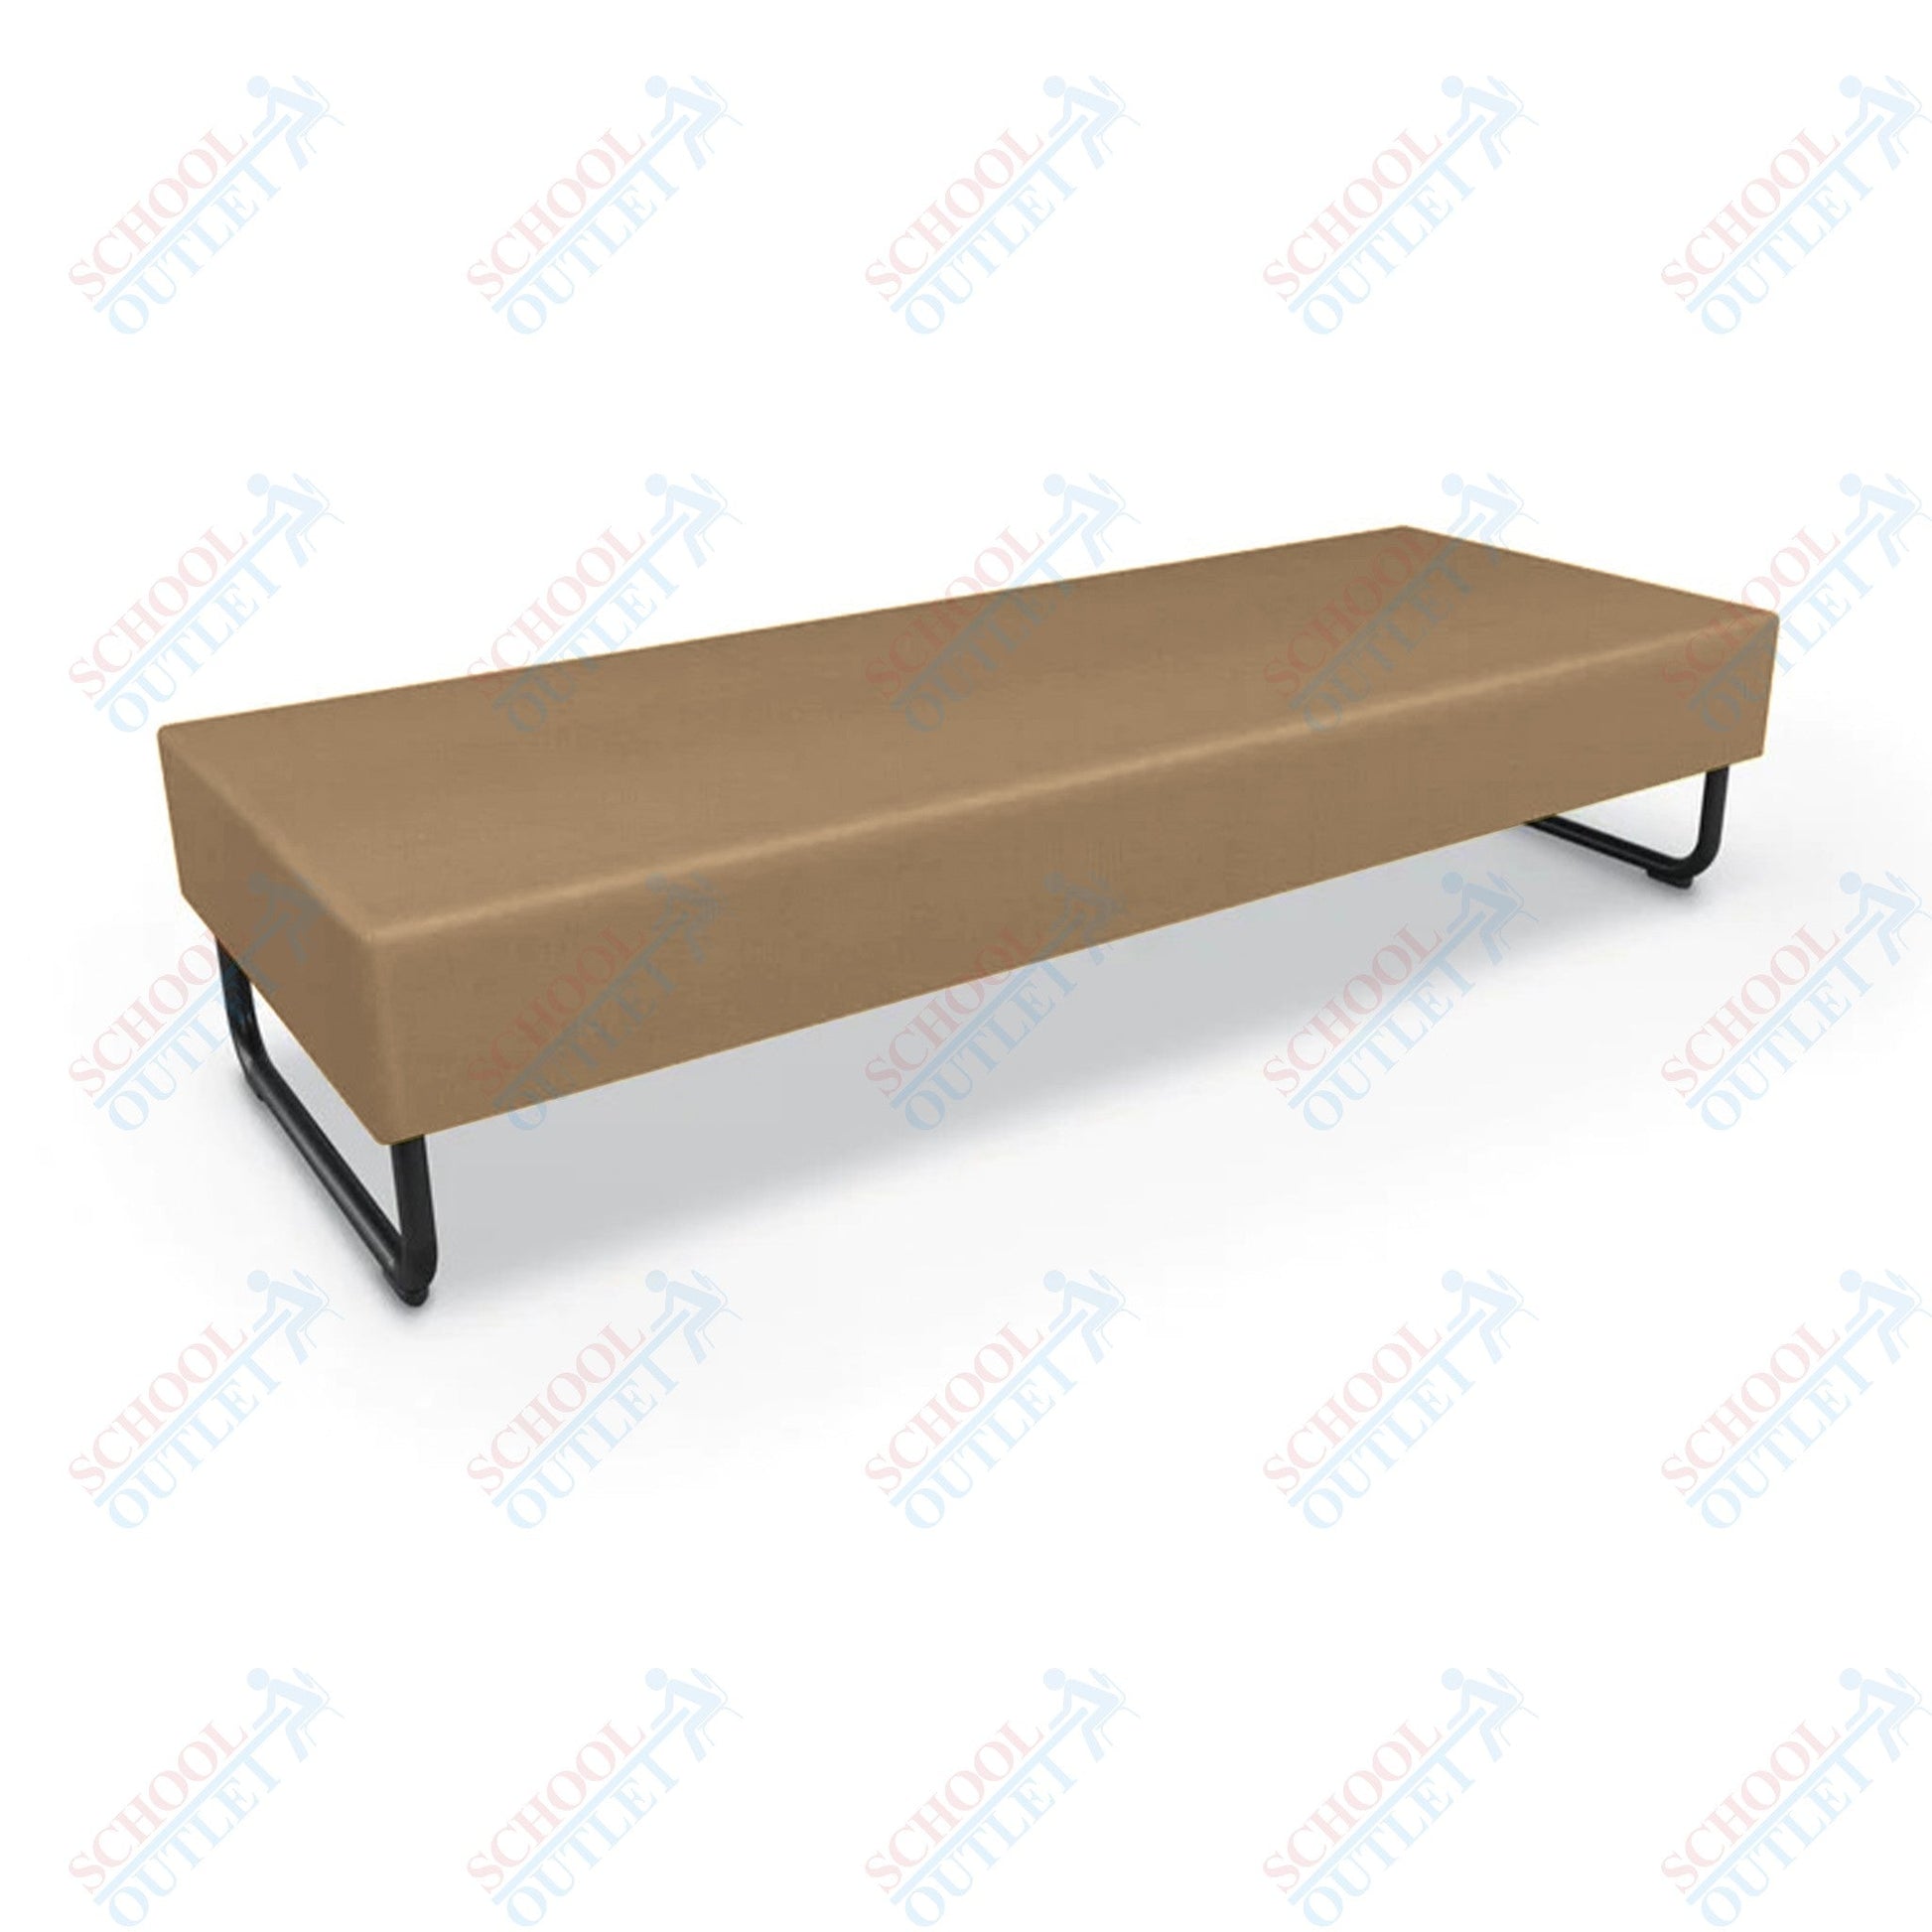 Mooreco Akt Soft Seating Lounge Sofa Bench - Grade 02 Fabric and Powder Coated Sled Legs - SchoolOutlet